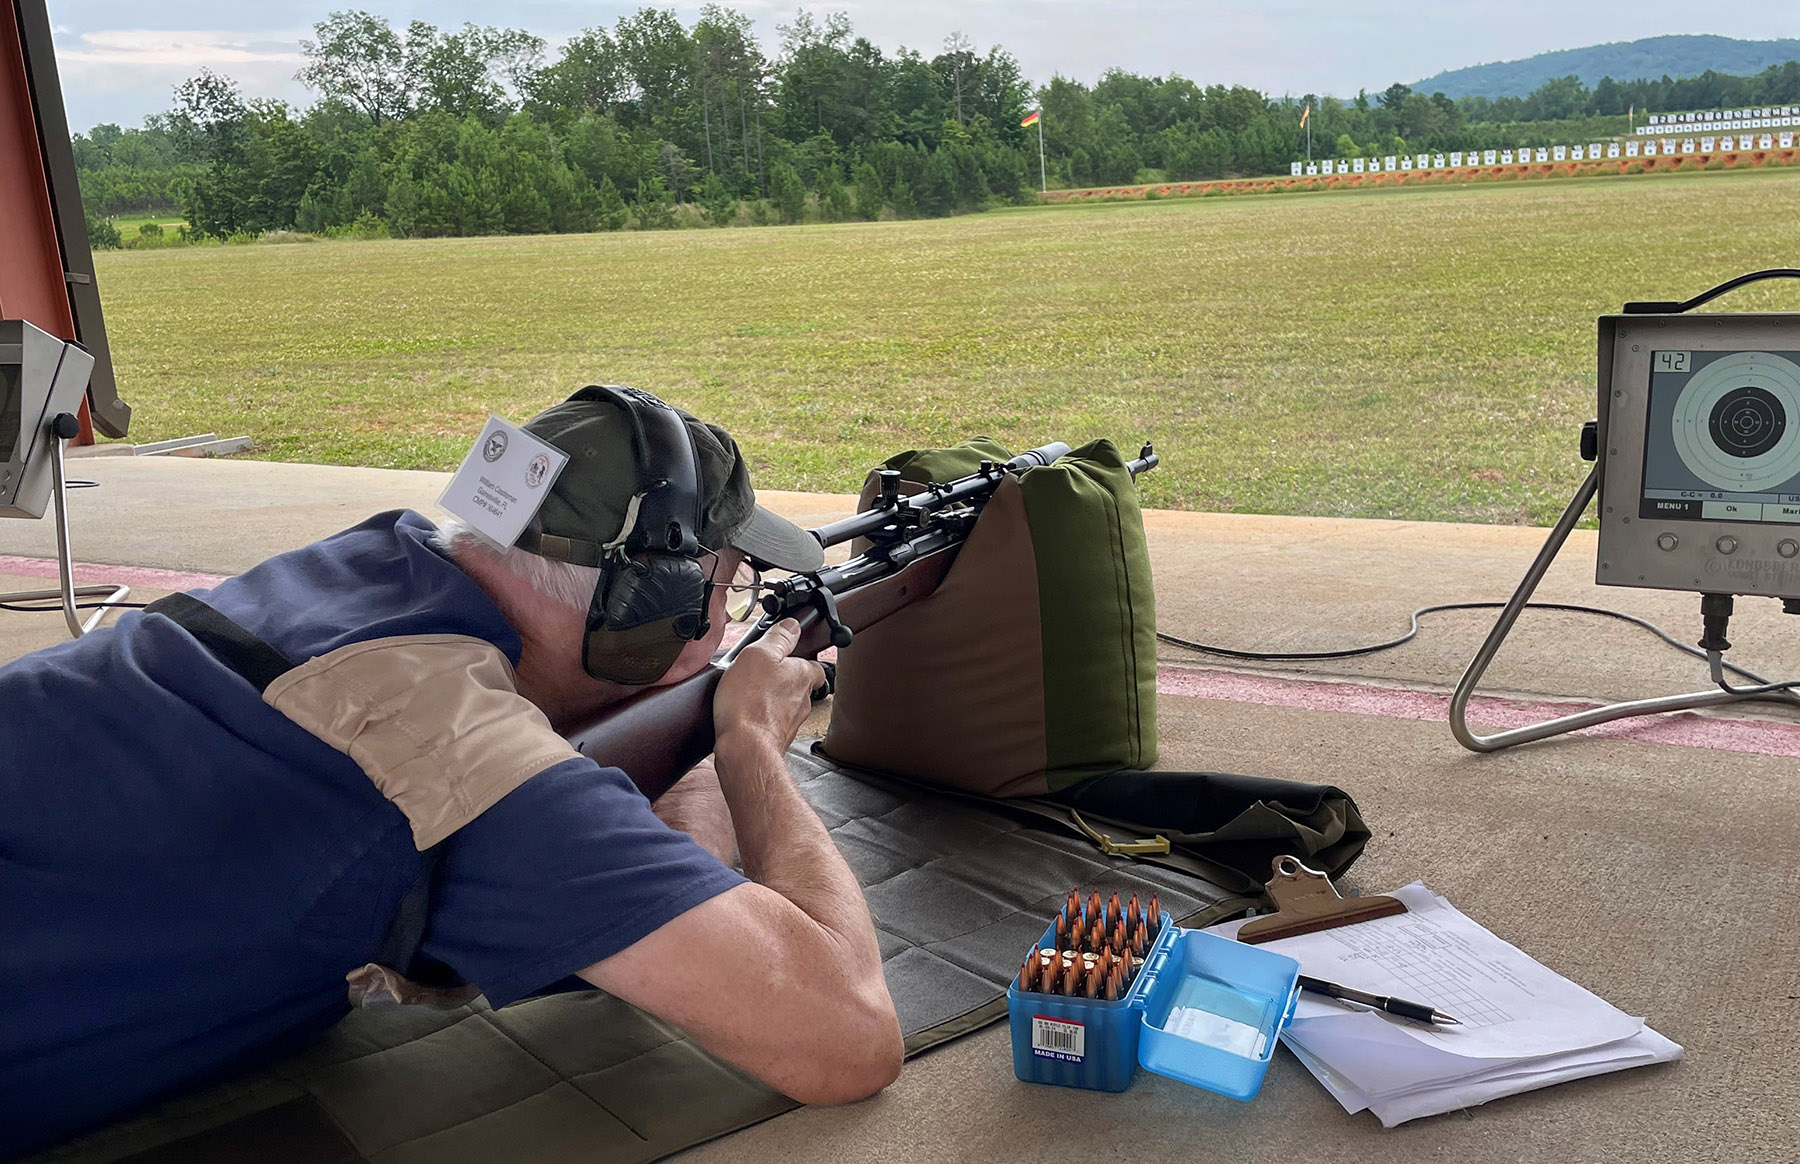 At the Vintage Sniper Match with my 1941A1 Springfield.  The 1941A1 Springfield issued by the USMC was the best long-range sniper rifle fielded by US Armed Forces during WW2.  My rifle was built from an original, as-issued 1934 Springfield Armory 1903A1 and a Hi-Lux replica of a Unertl 8X rifle scope.  I shot my personal best in a vintage sniper match on the 300 and 600 yd course (194-3X out of 200 – 97%) to record the 5th highest individual score of 76 competitors at the match.